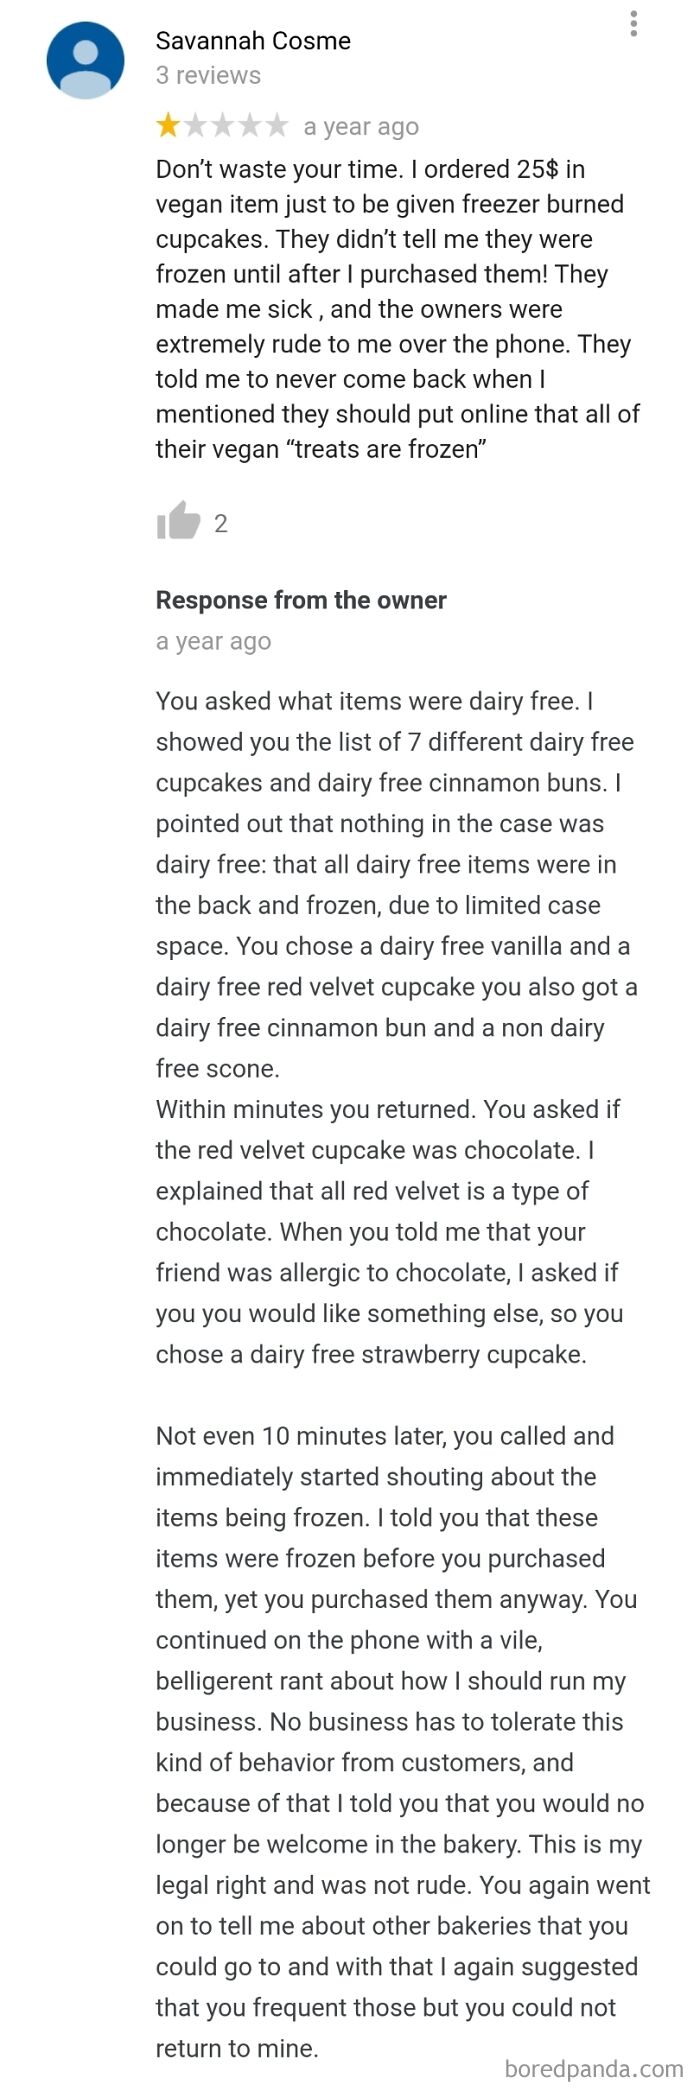 My Favorite Dedicated Gluten Free Bakery (That Also Has Nut Free, Vegan, And Dairy Free Options) And One Of The Only Bad Reviews I've Ever Seen For Them